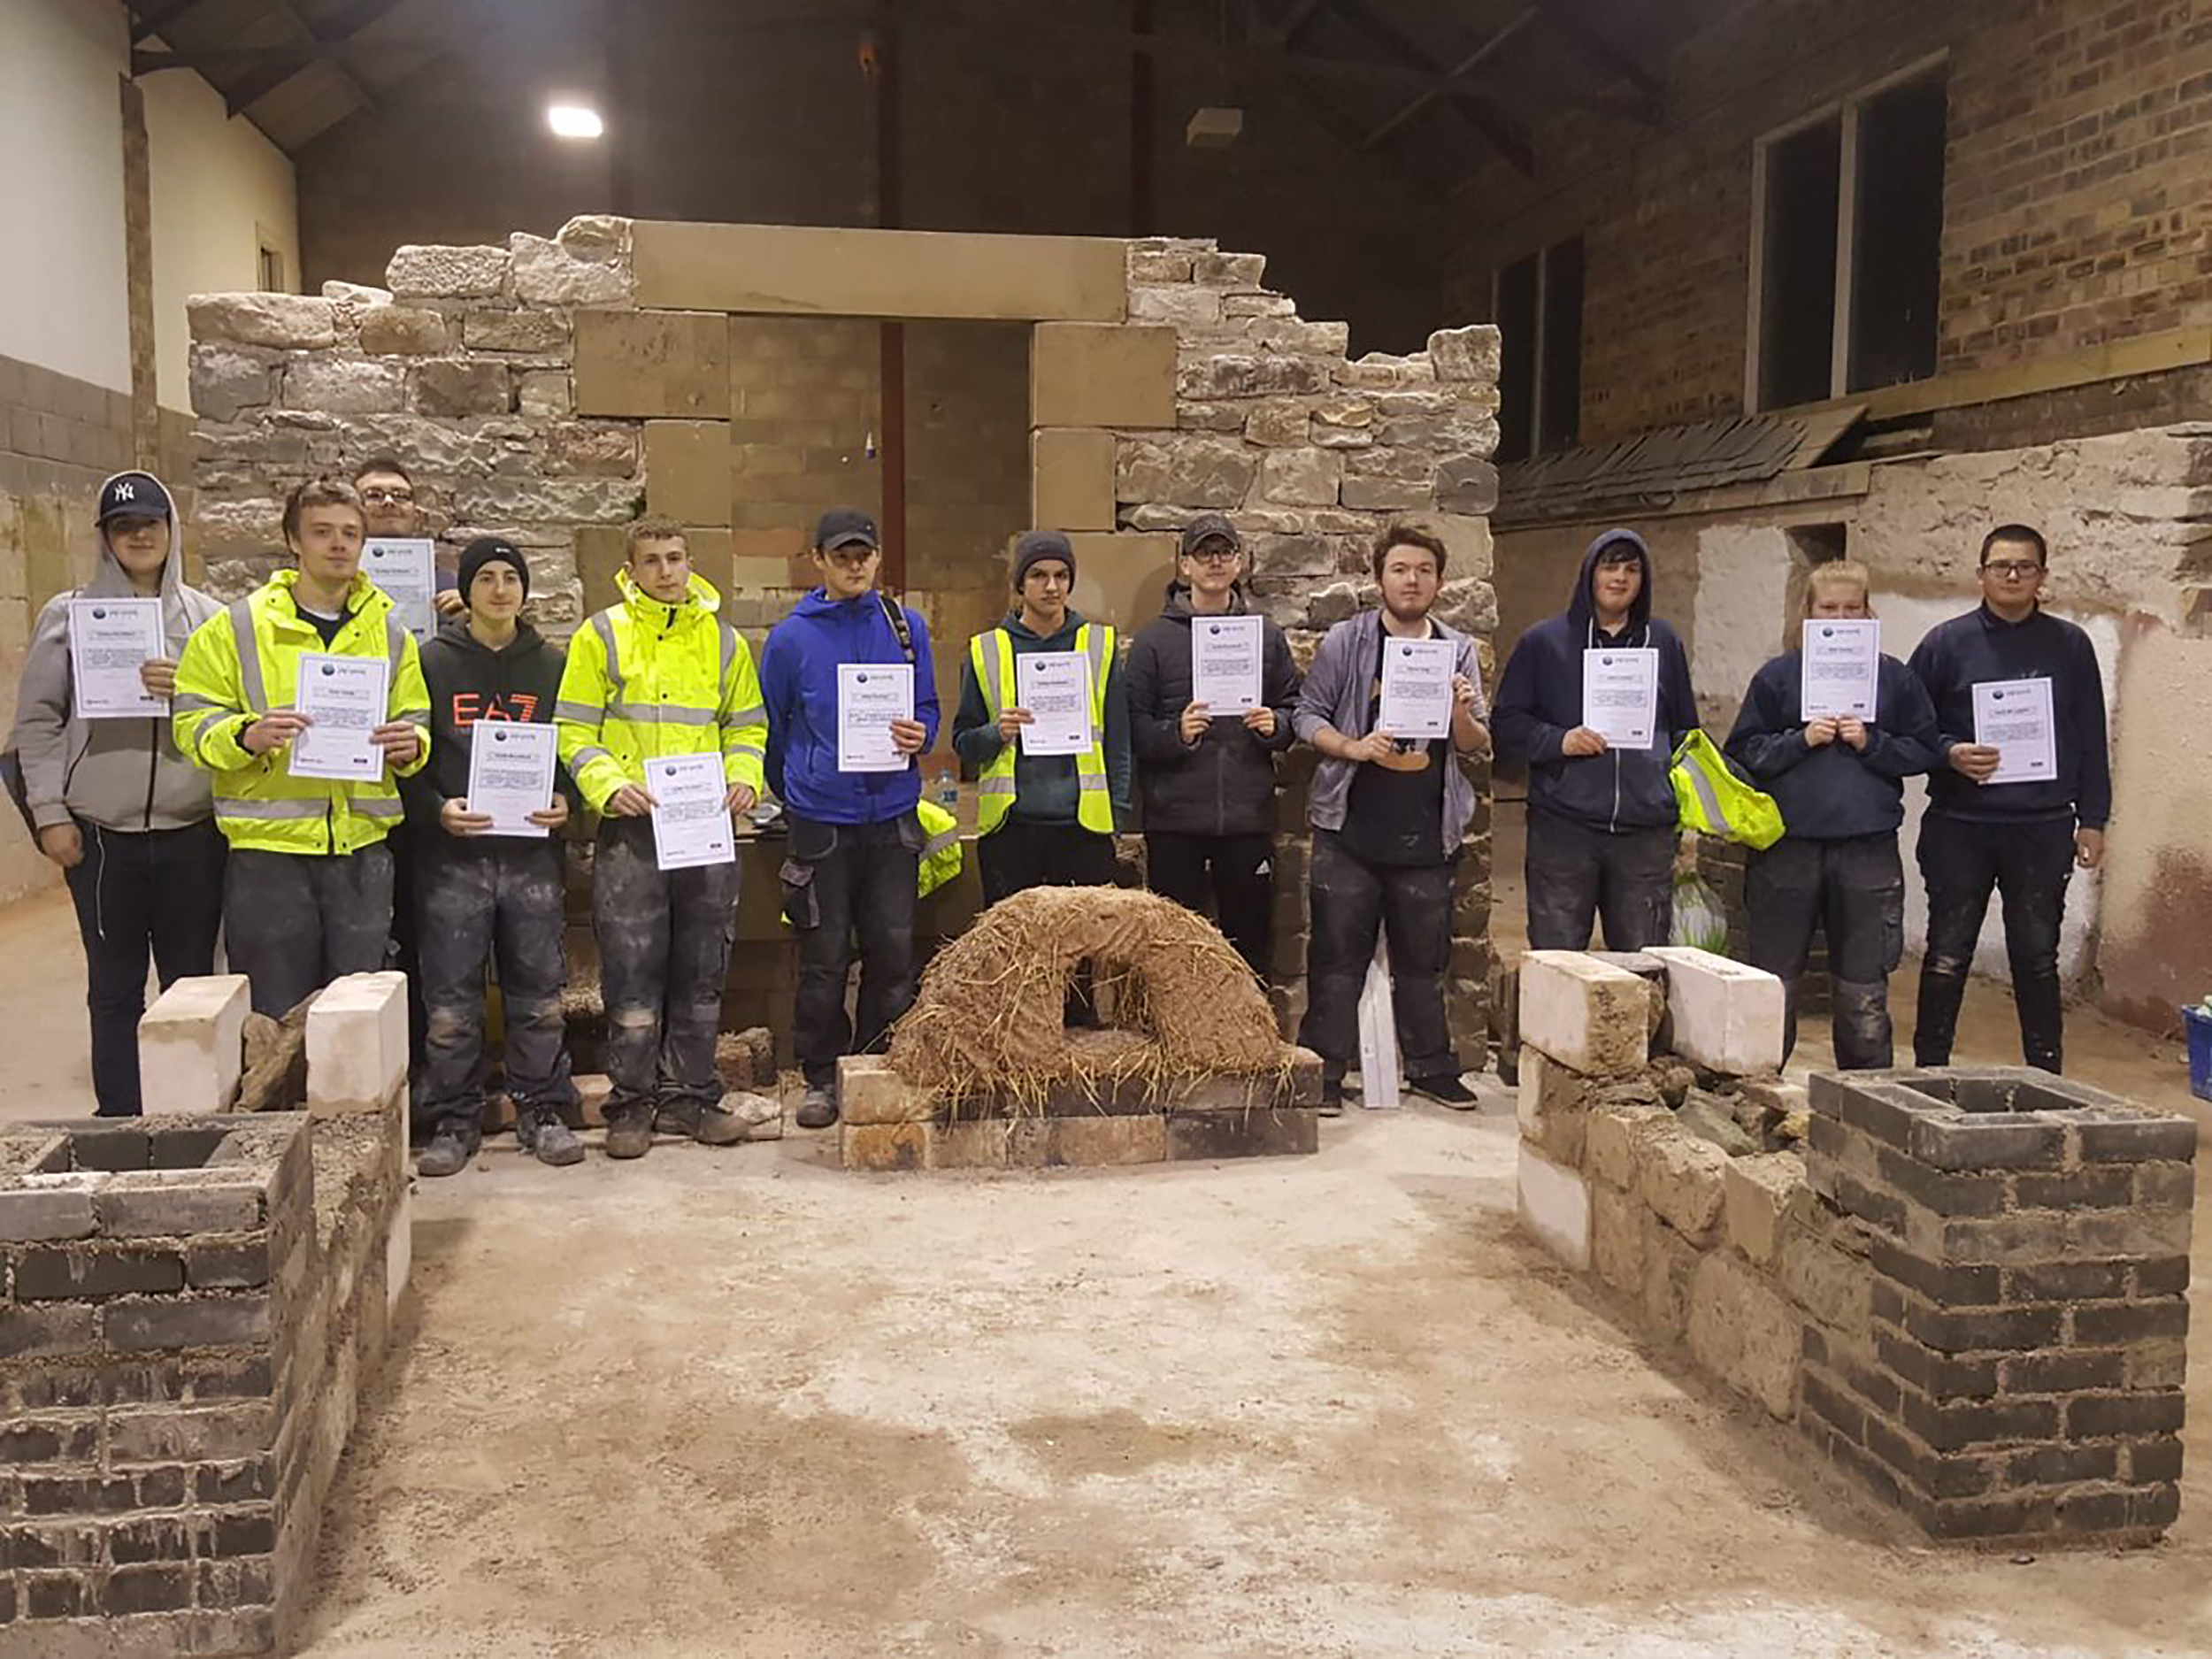 More than 80 students gain qualifications while restoring Belleisle Park walled garden